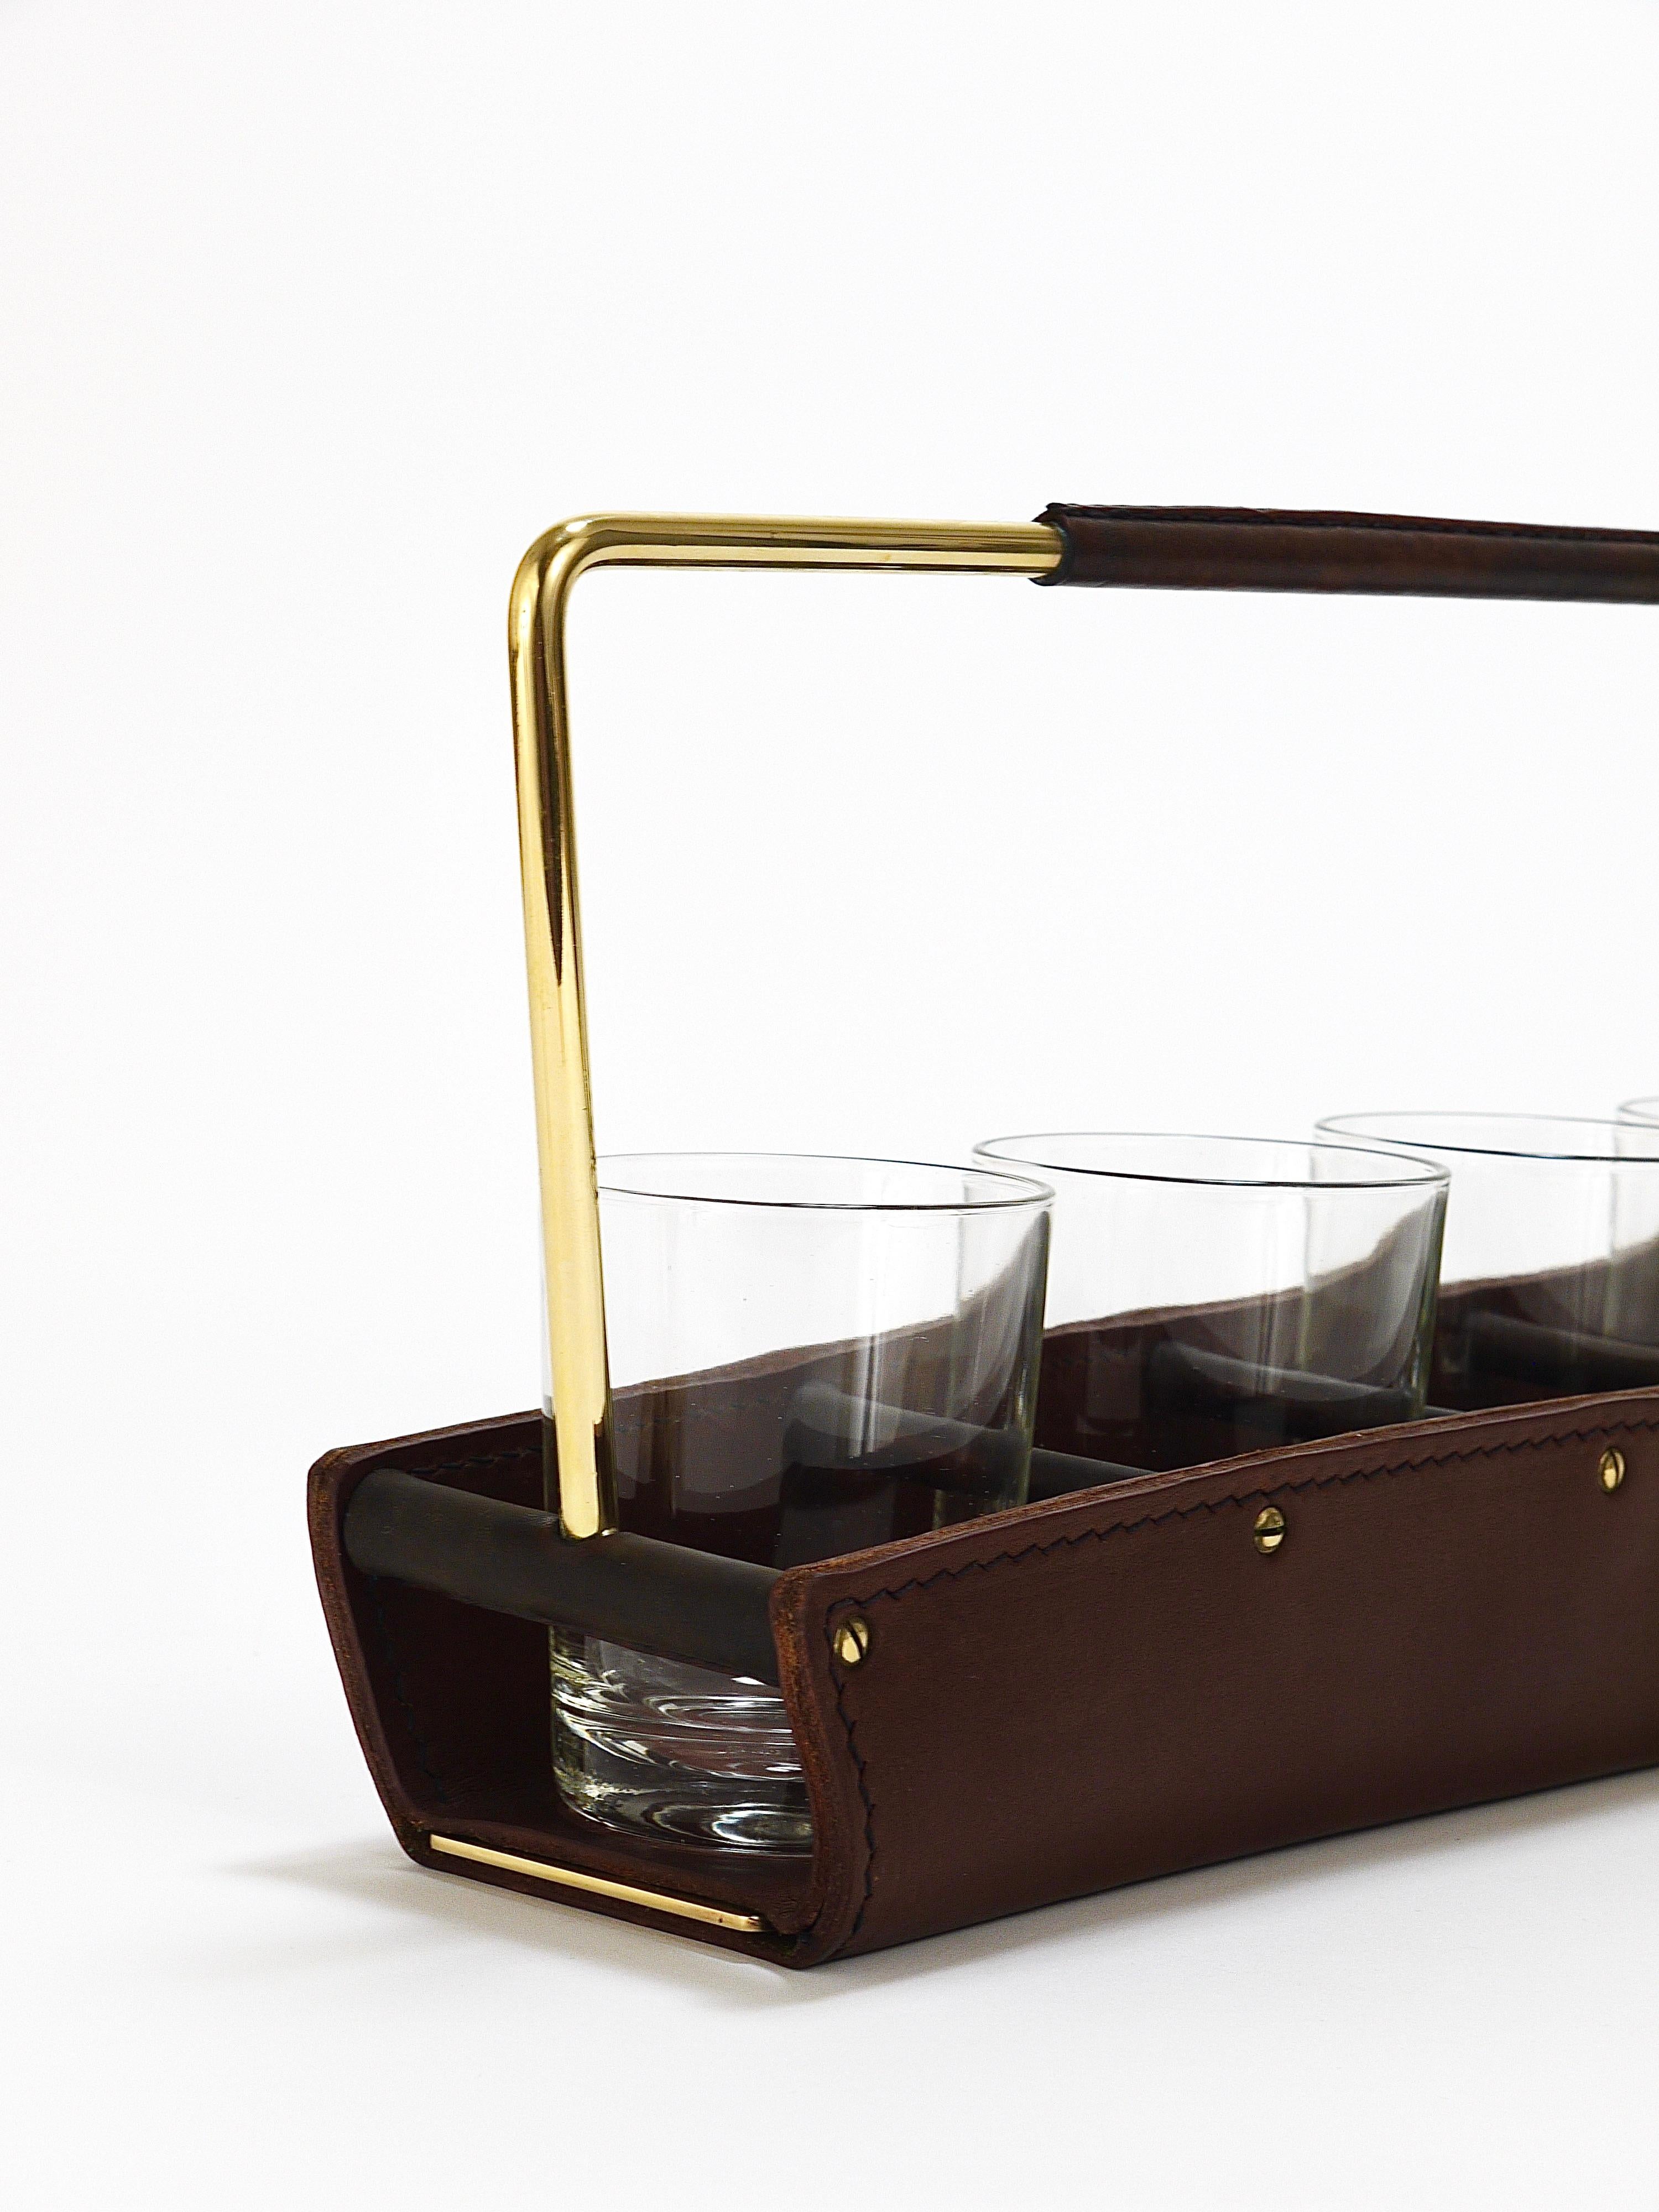 Carl Auböck II Drinking Glass Carrying Rack, Leather & Brass, Austria 1950s In Good Condition For Sale In Vienna, AT